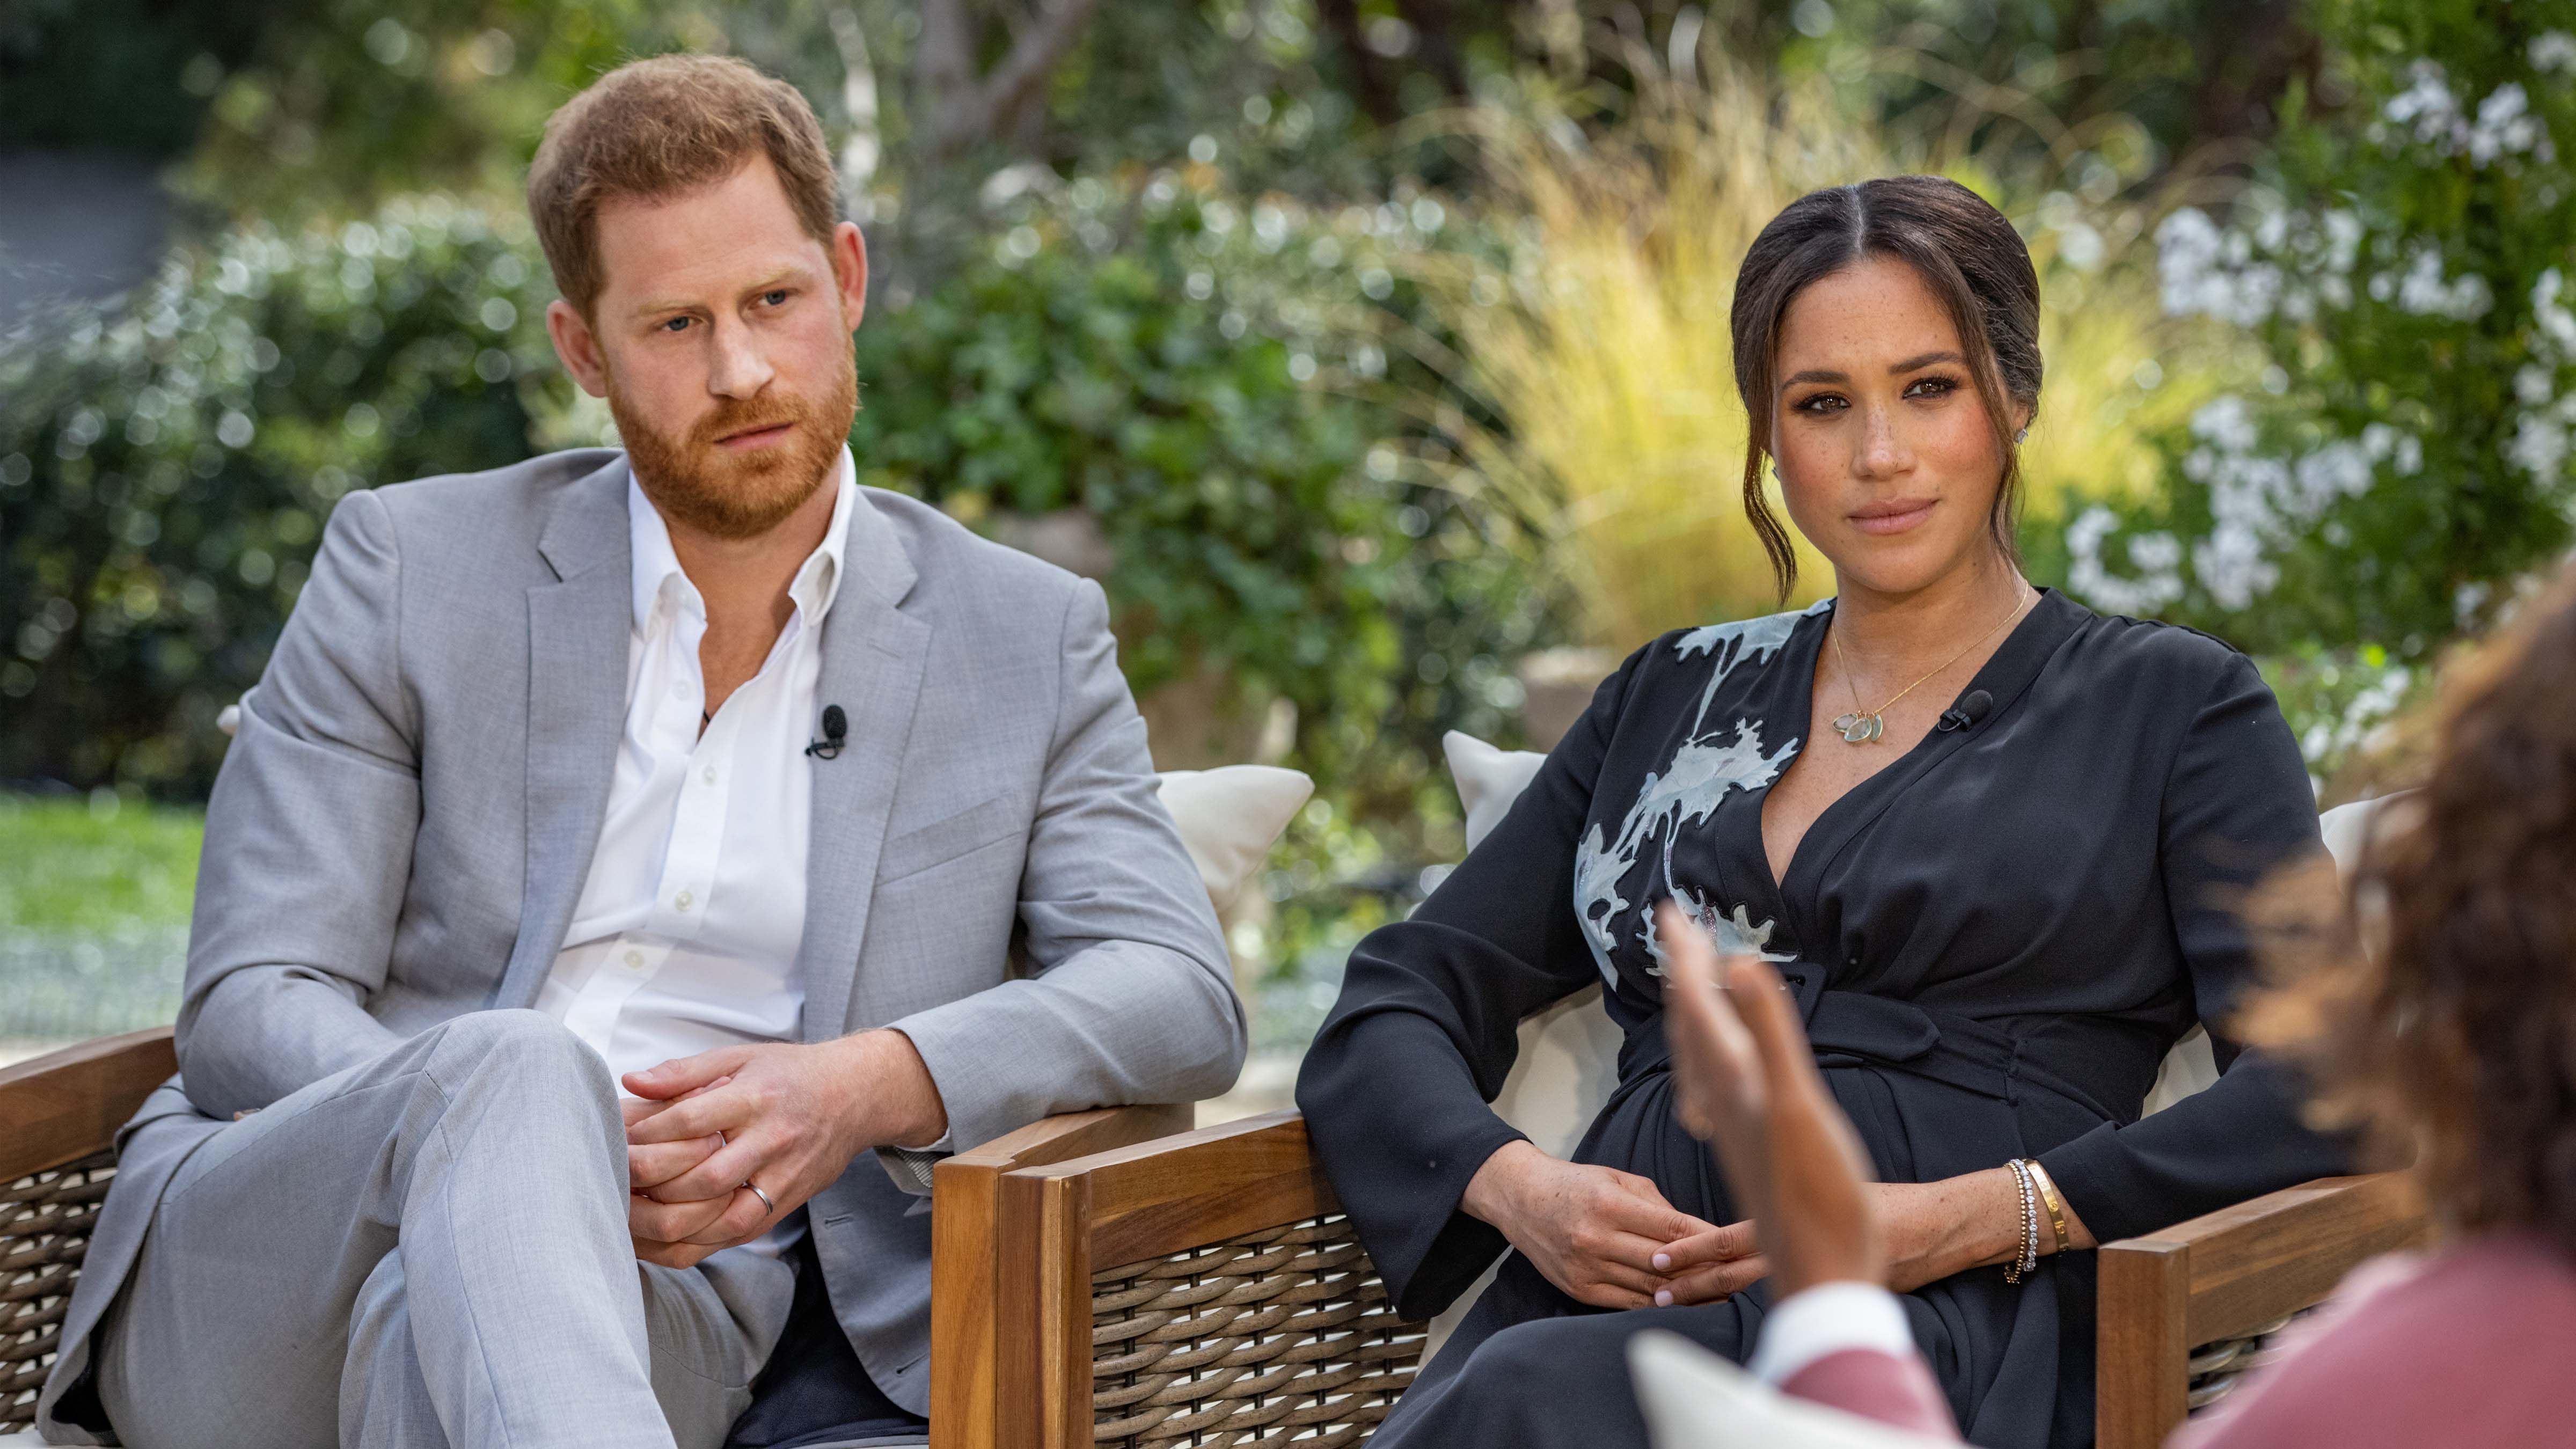 Meghan Markle's Close Friend Praises Her as Being 'Stronger Than She Knows'